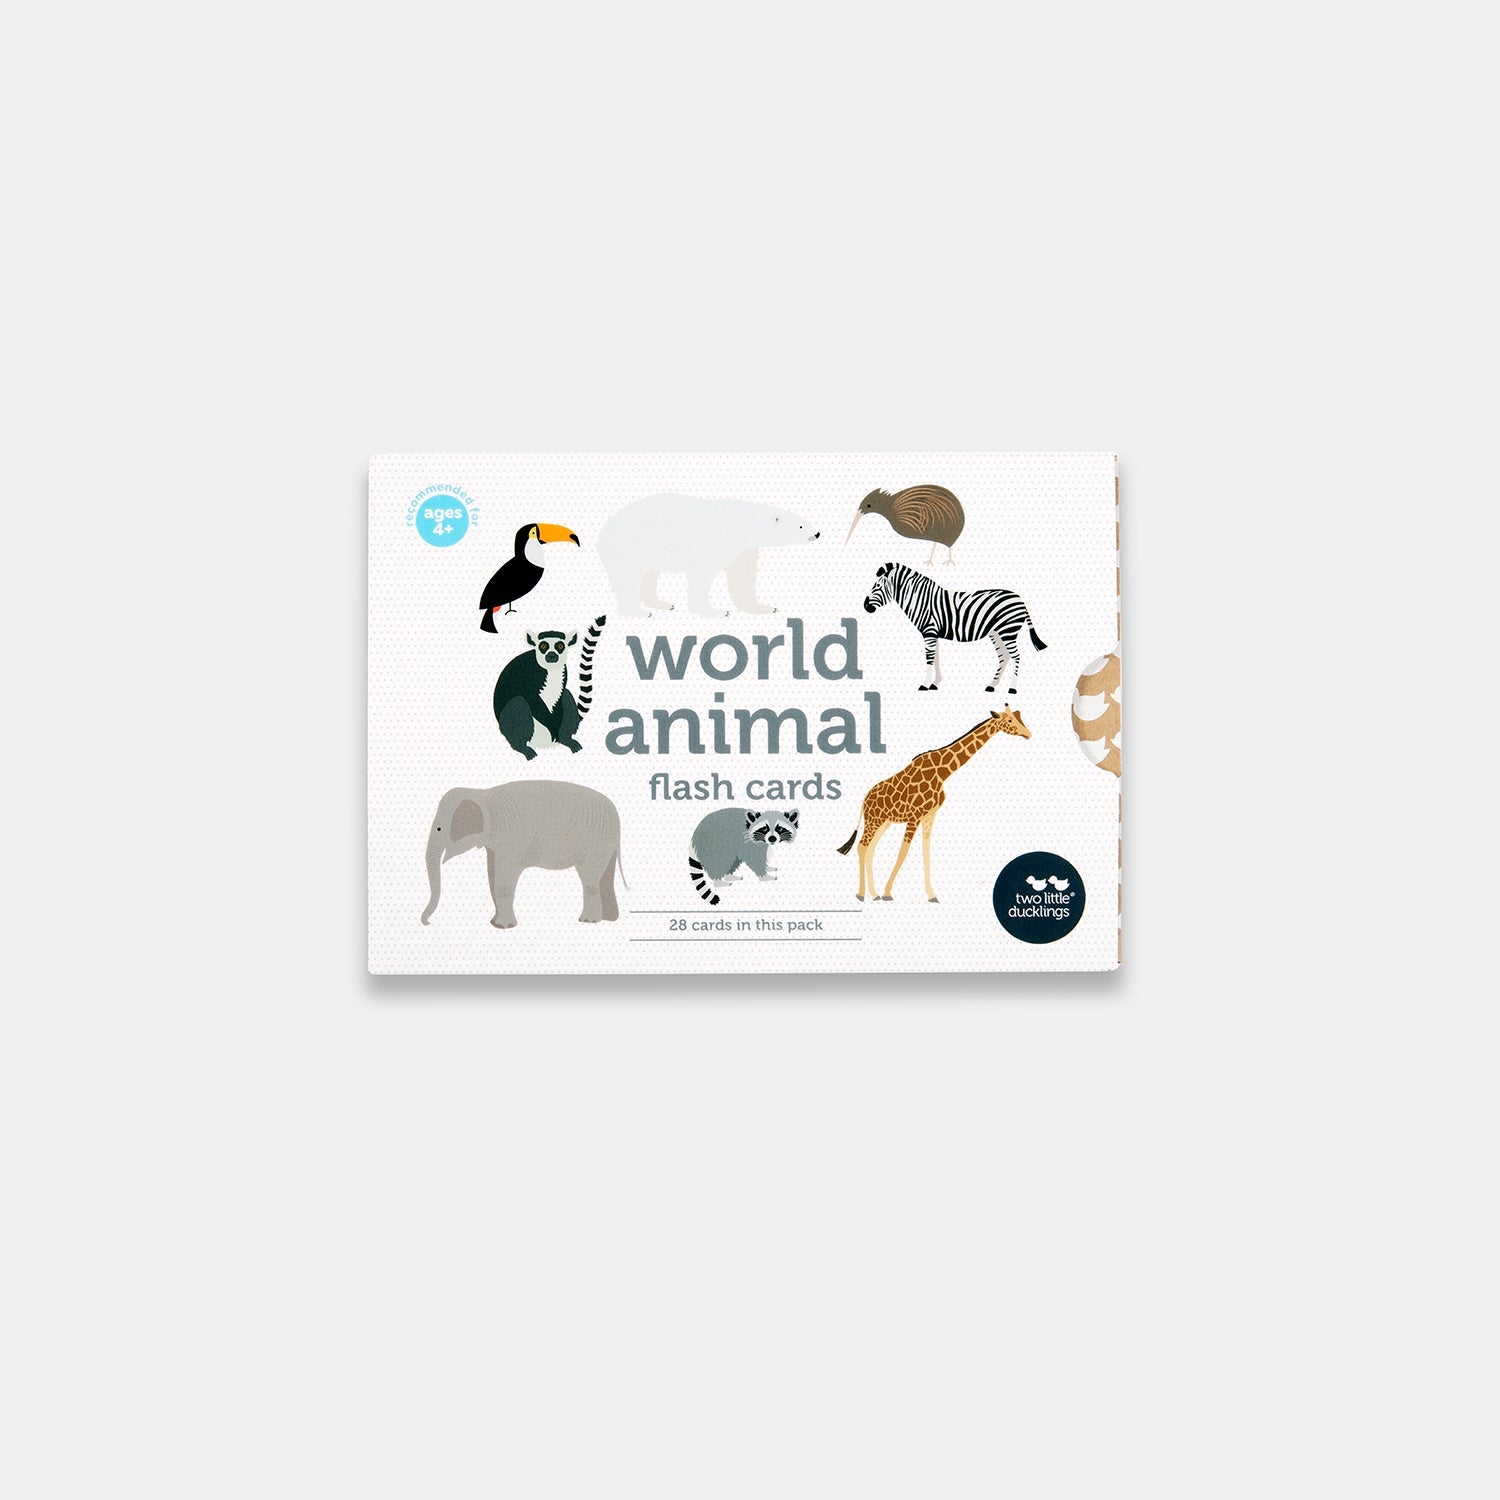 WORLD ANIMALS FLASH CARDS by TWO LITTLE DUCKLINGS - The Playful Collective